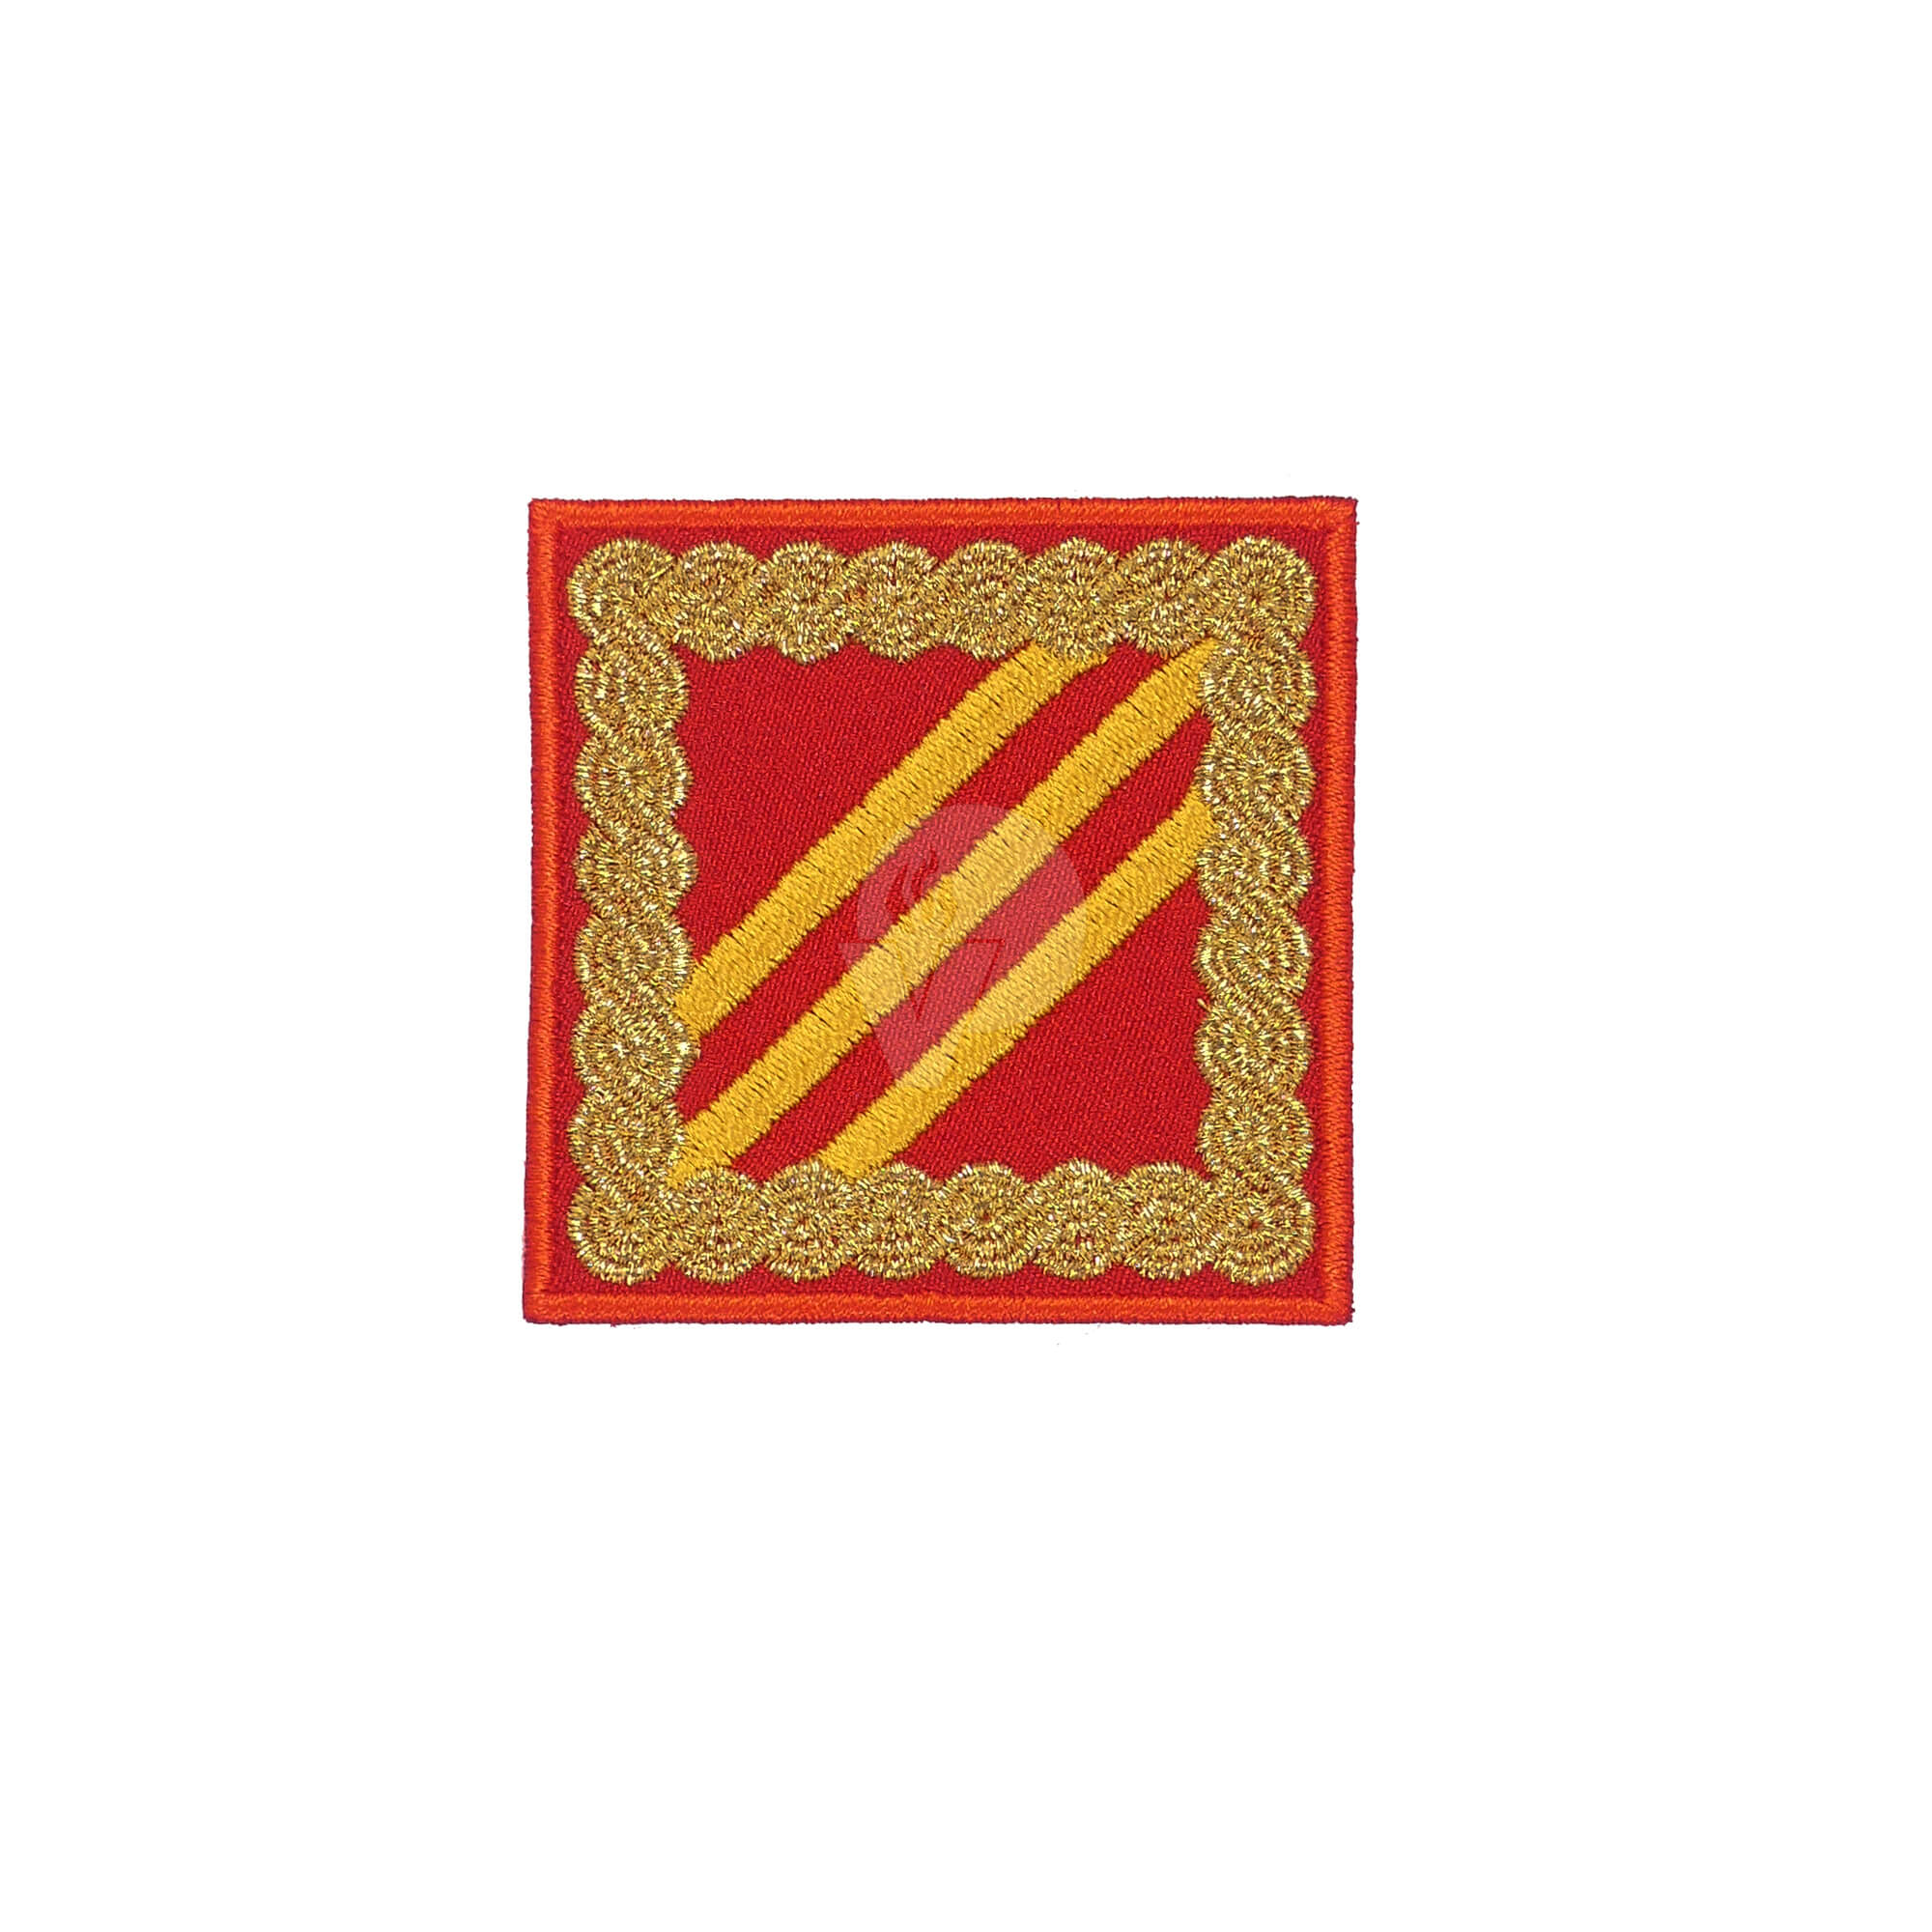 Mark for Professional Firefighter Workplace, Fire Brigade Commander